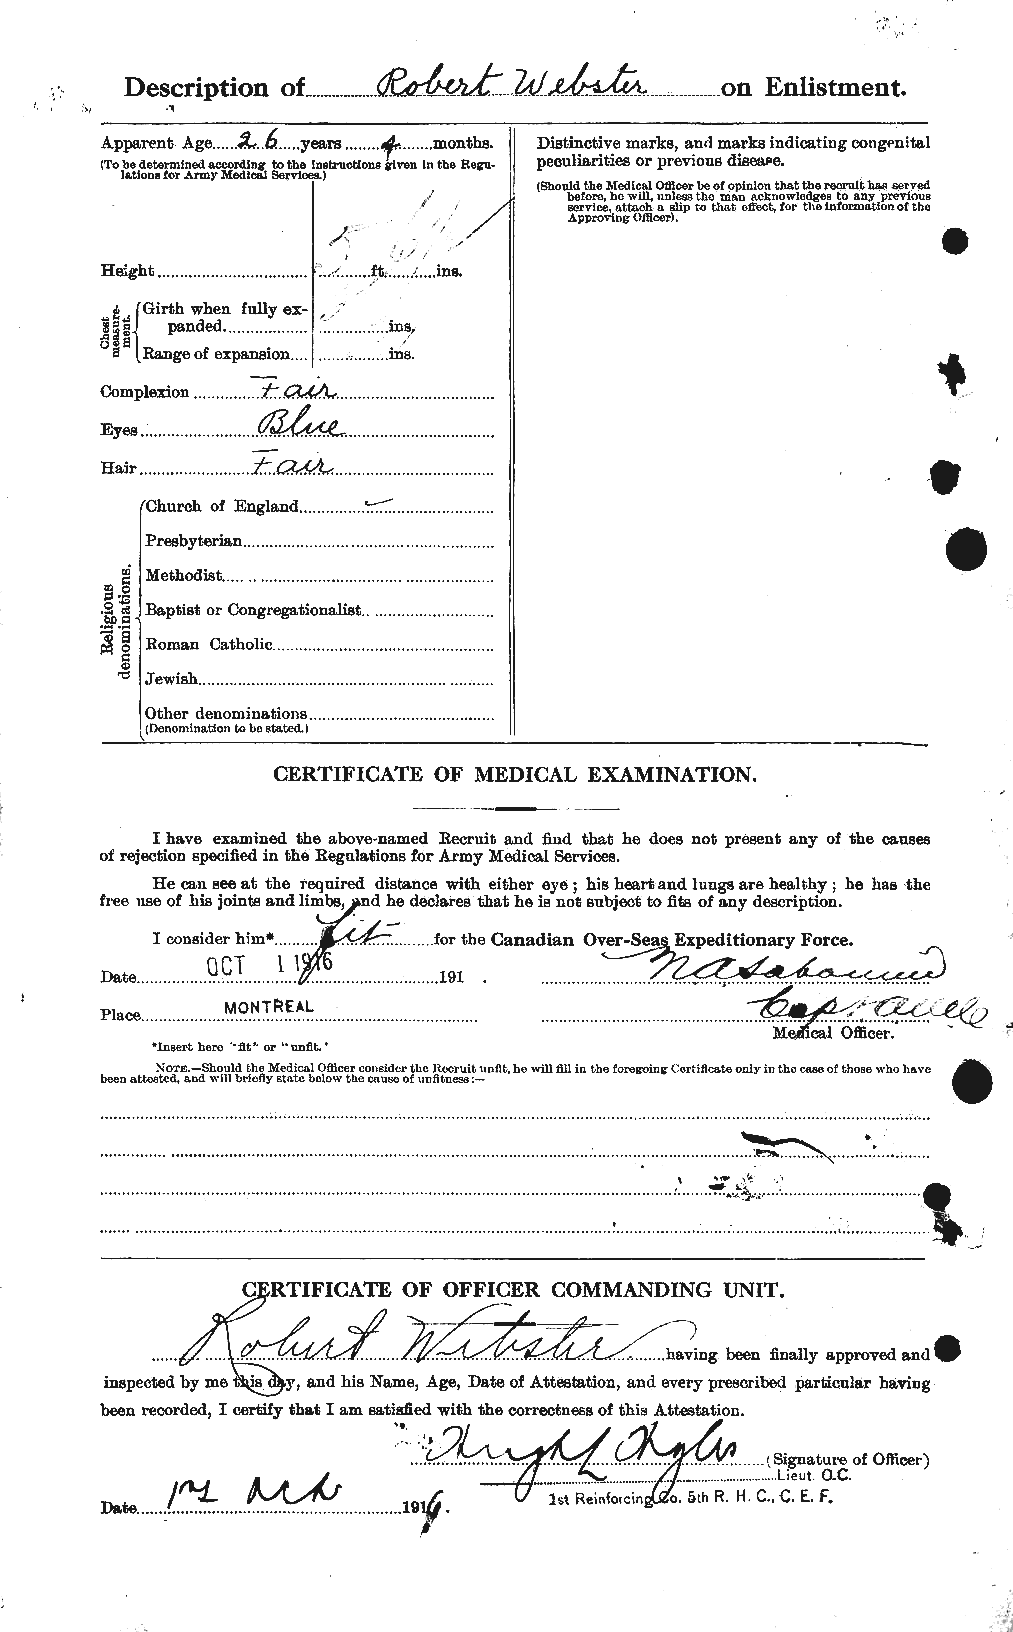 Personnel Records of the First World War - CEF 661956b